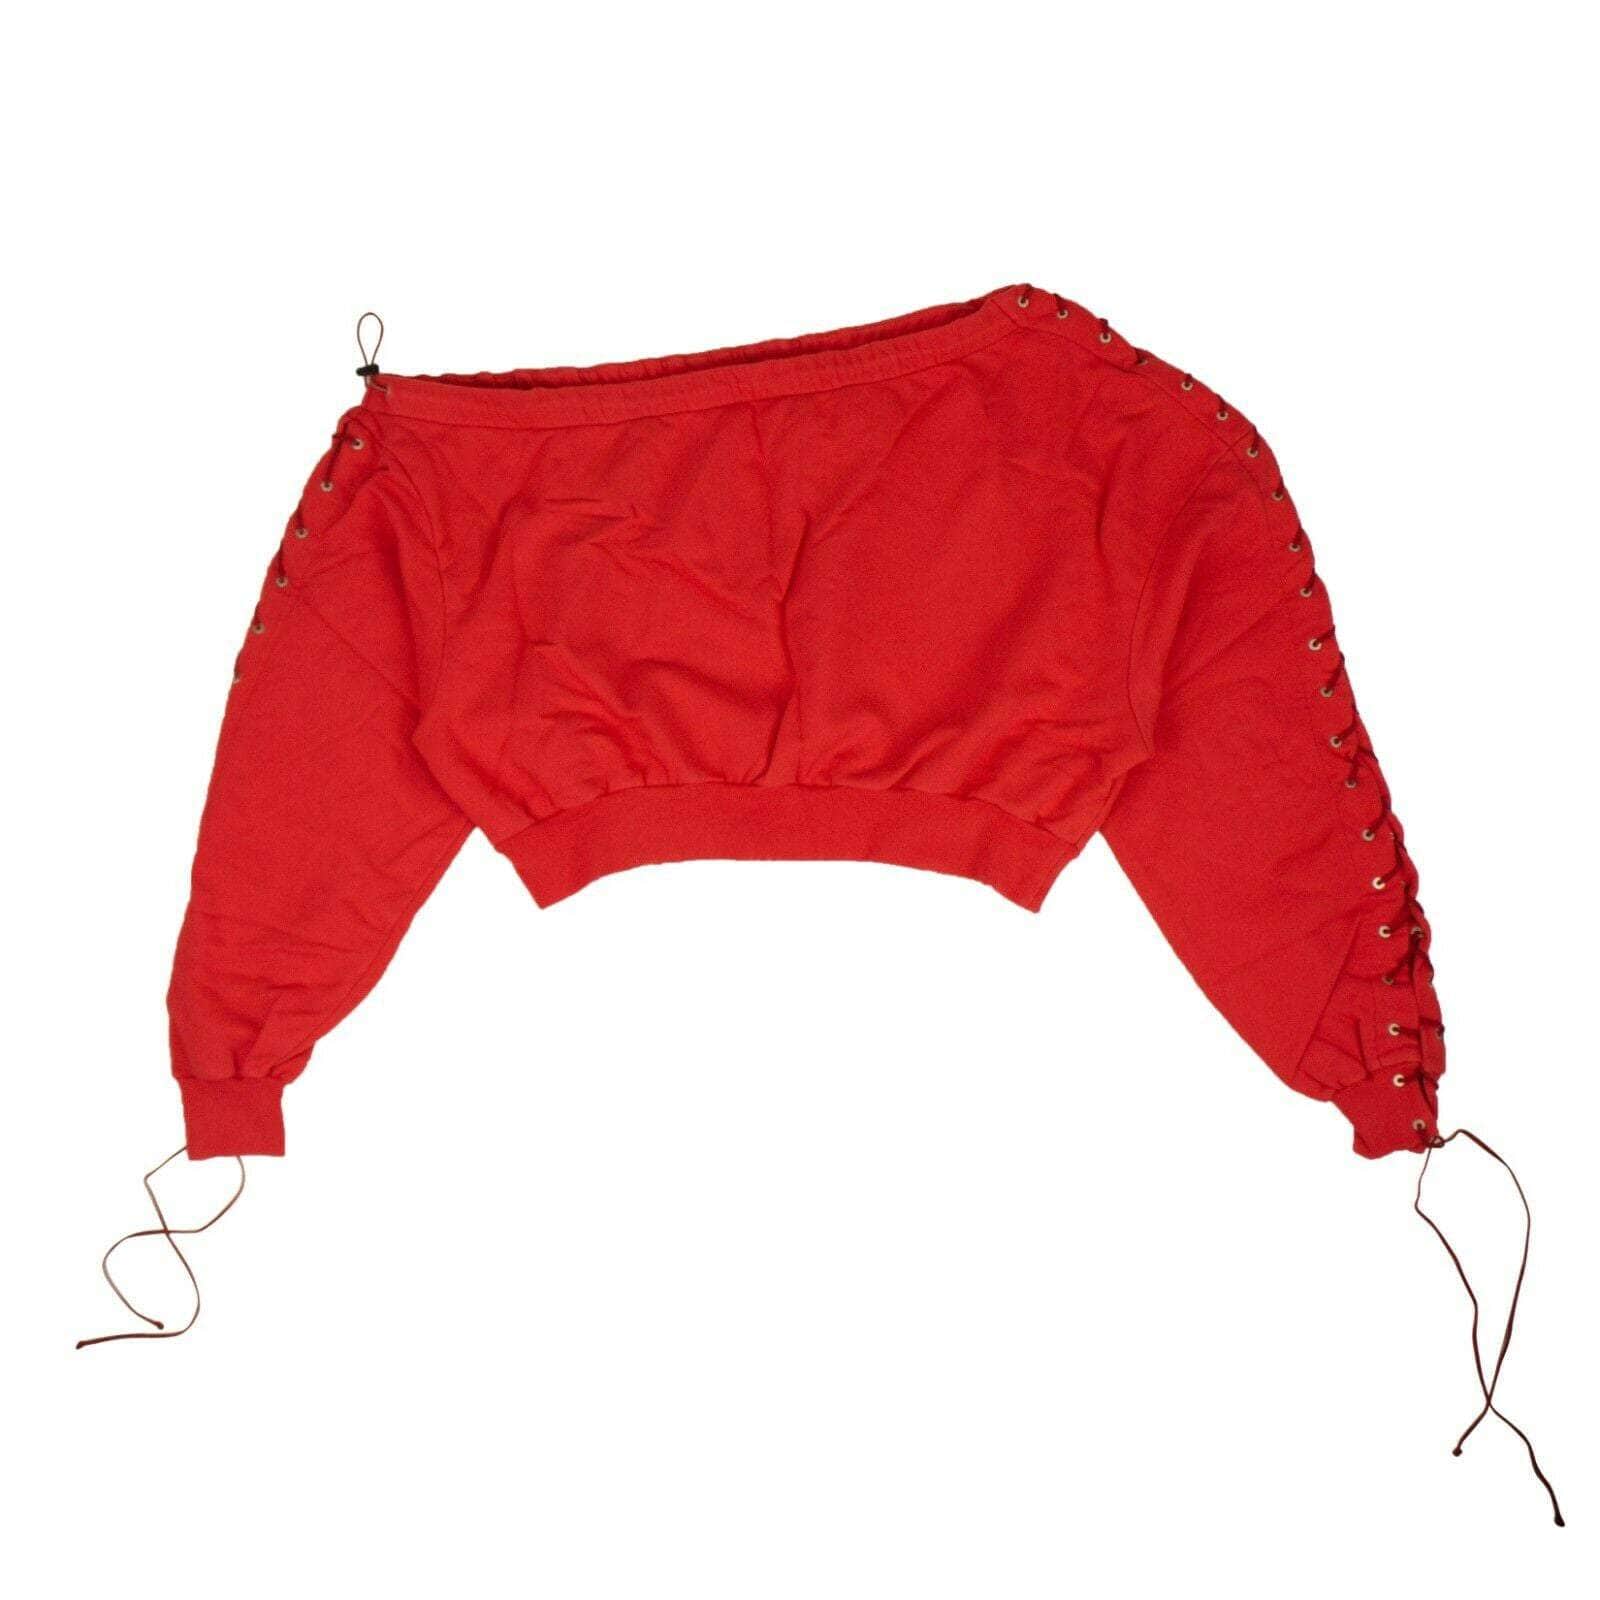 Unravel Project channelenable-all, chicmi, couponcollection, gender-womens, main-clothing, size-l, size-s, size-xs, size-xxs, under-250, unravel-project, womens-hoodies-sweatshirts Red Off The Shoulder Sweatshirt